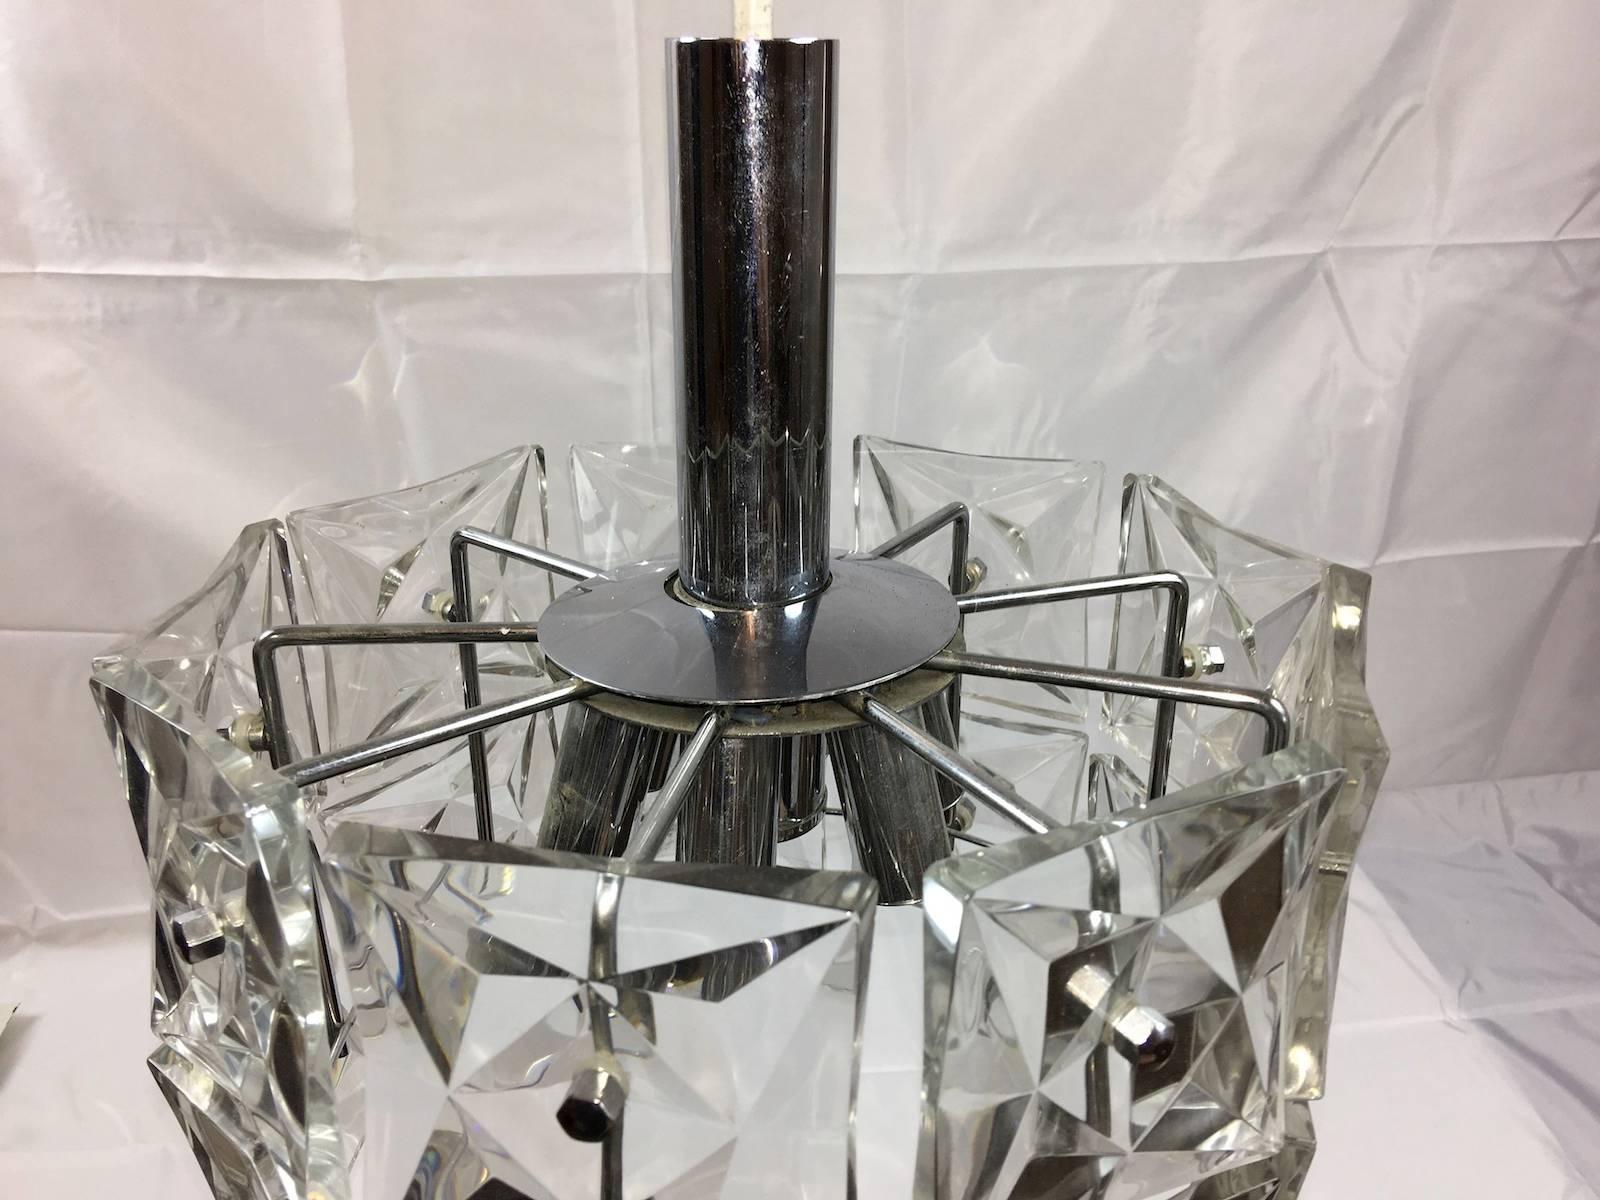 Modern Geometric Kinkeldey Two-Tier Round Hanging Light Fixture In Good Condition For Sale In Frisco, TX